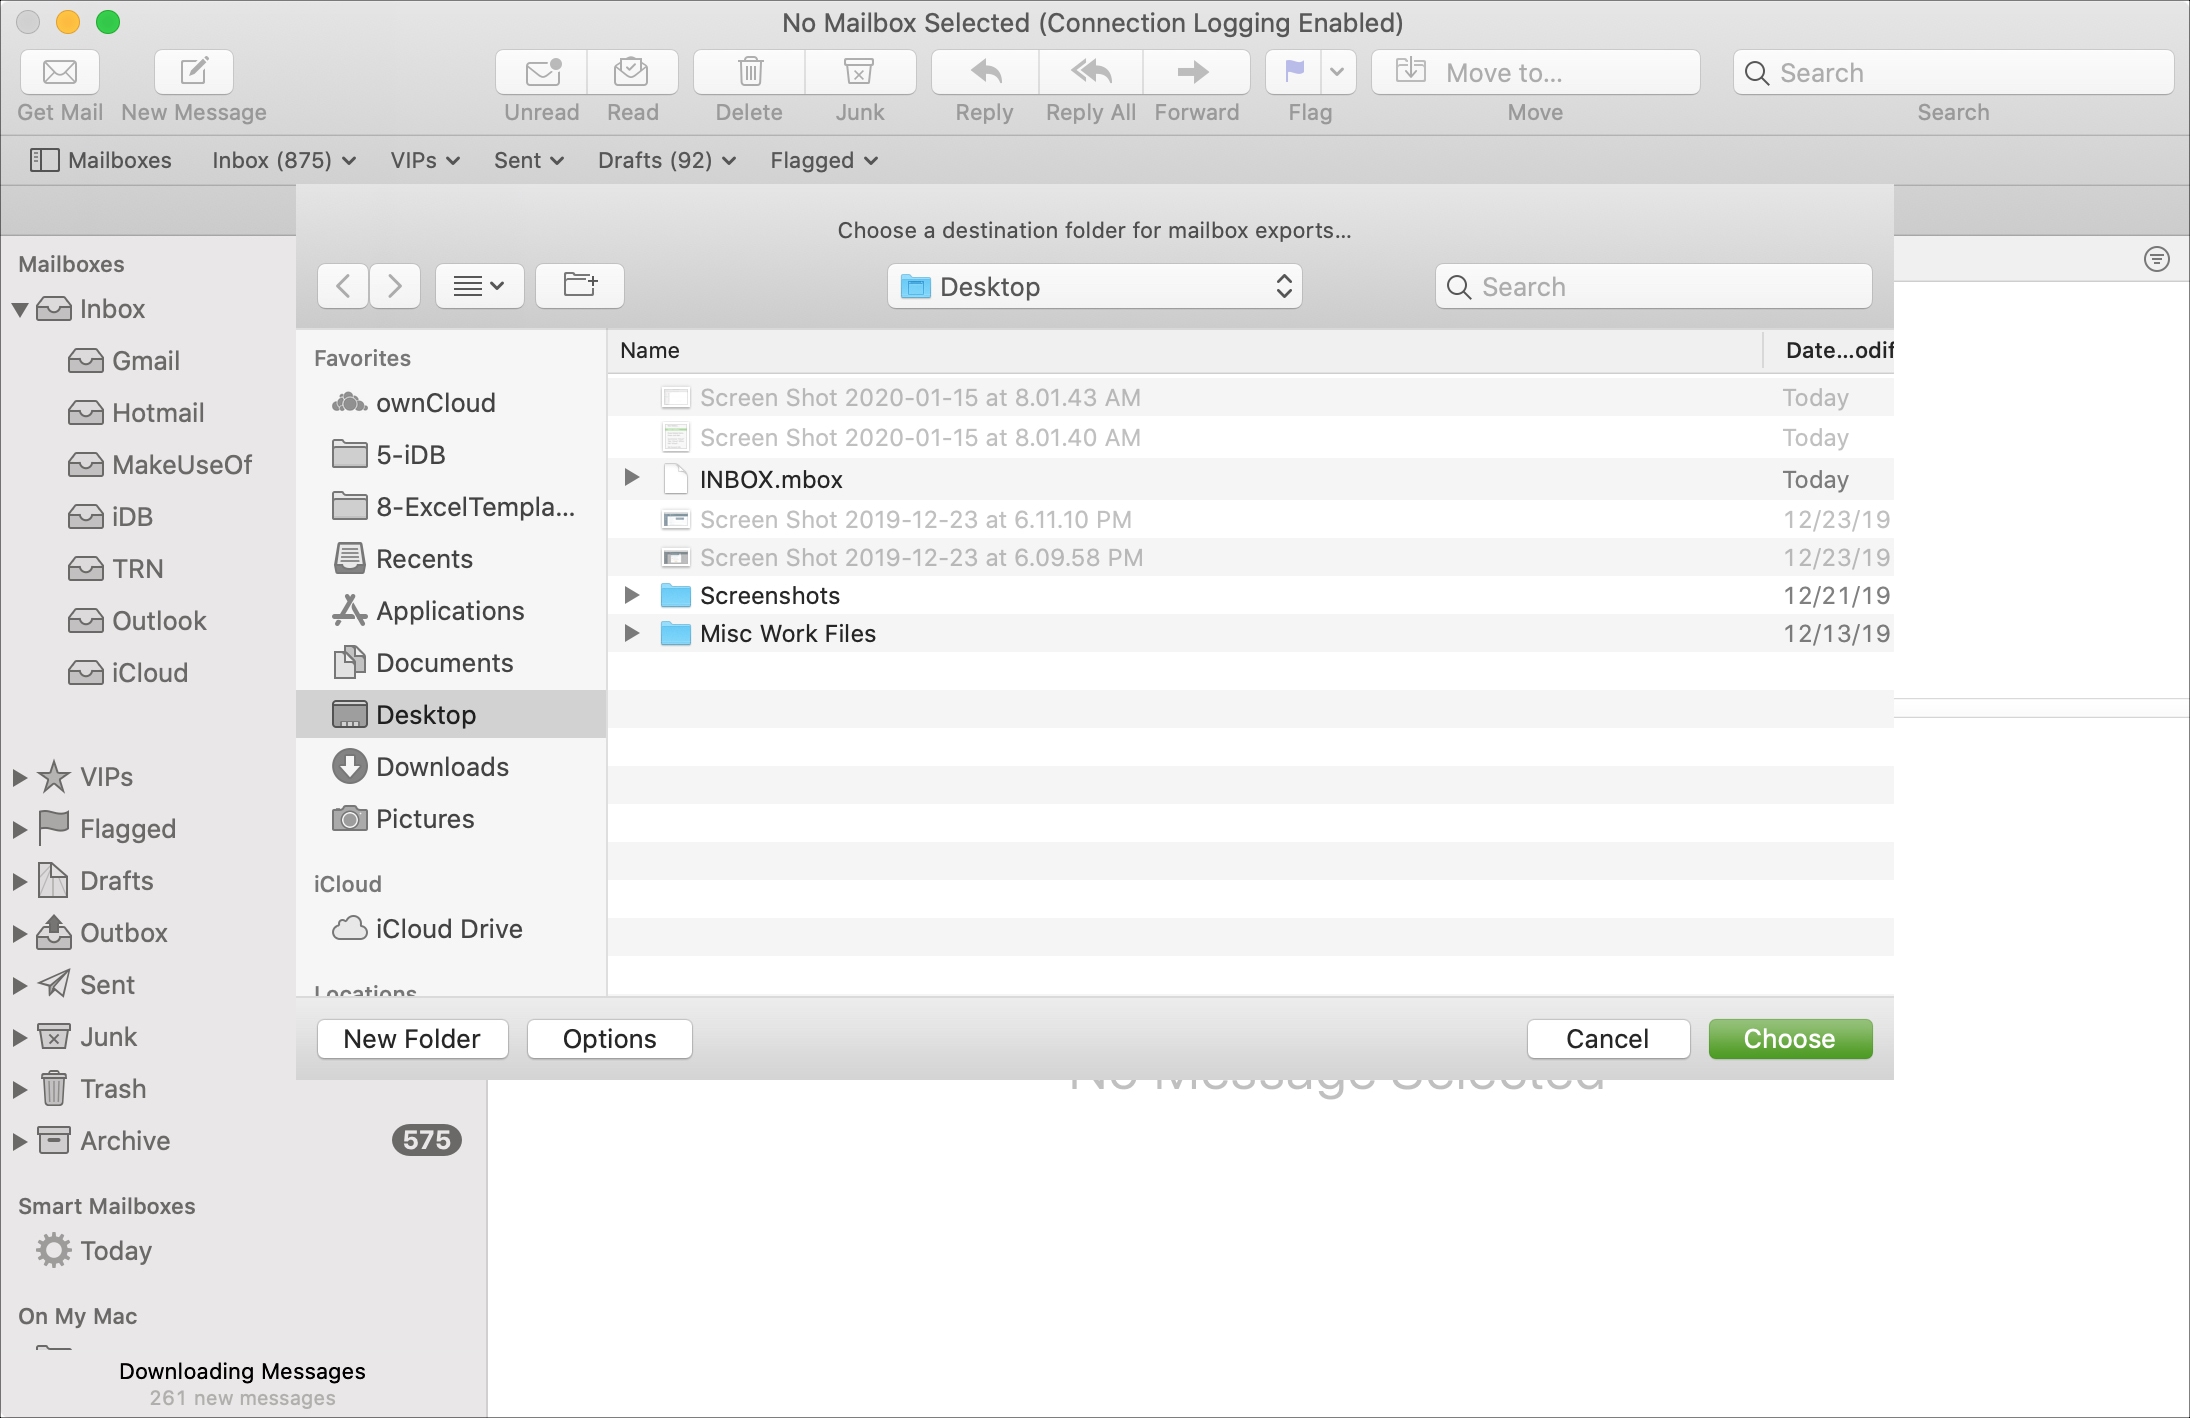 How To Import And Export Mailboxes In Mail On Mac